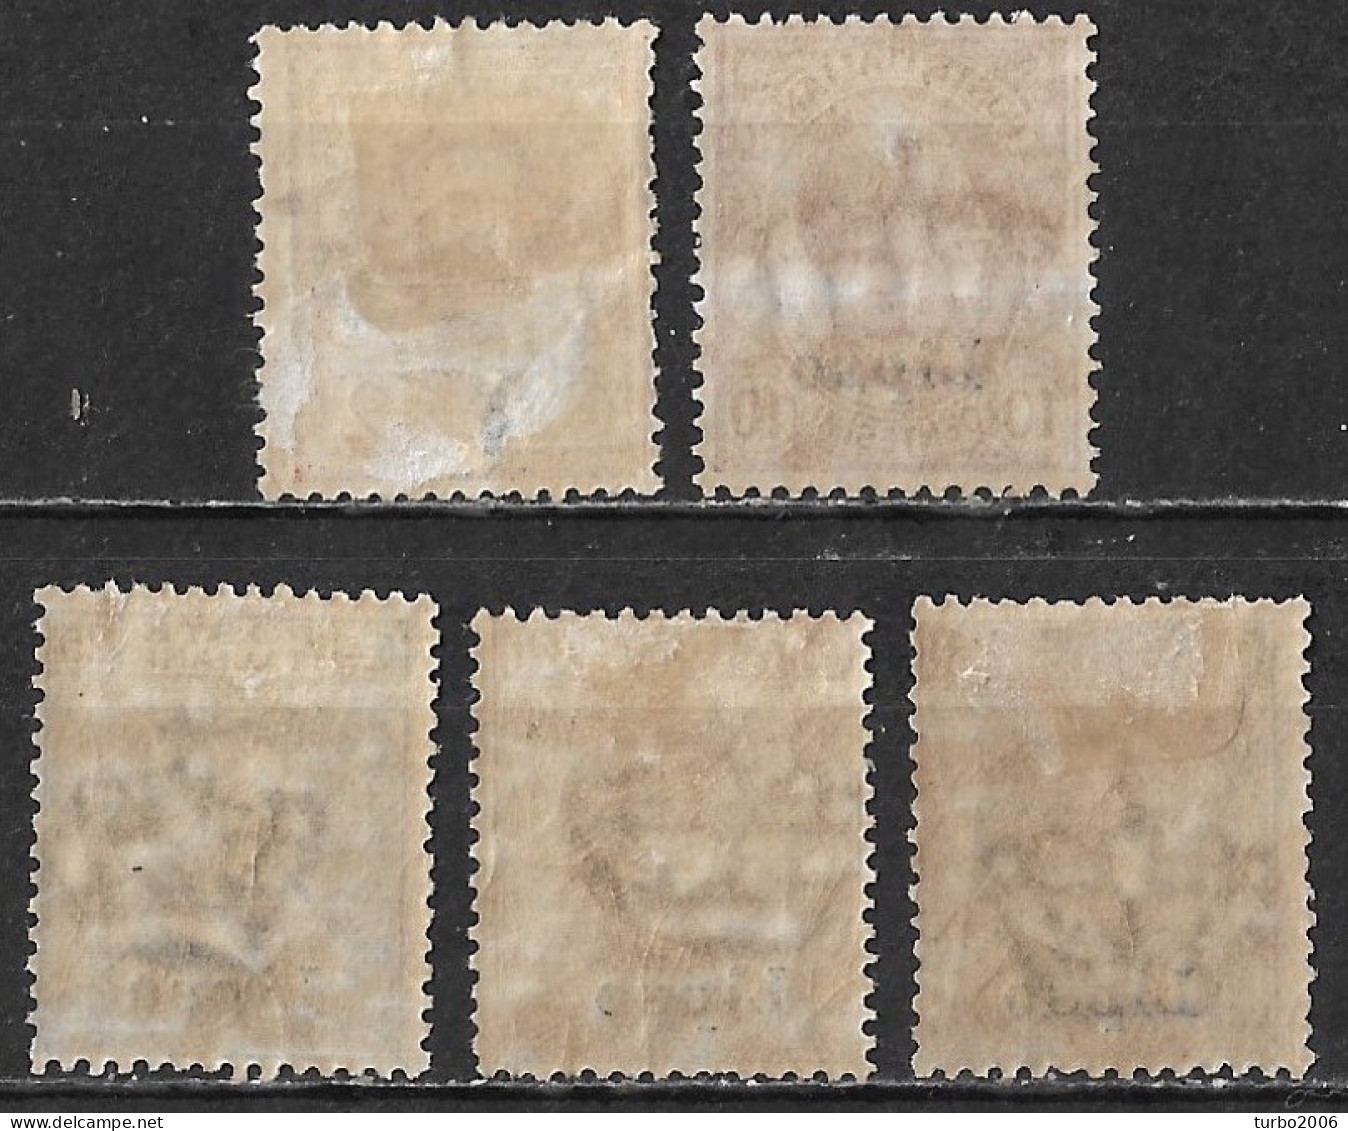 DODECANESE 1912 Italian Stamps With Black Overprint LIPSO 5 Values From The Set Vl. 1-3-5/7 MH - Dodekanisos